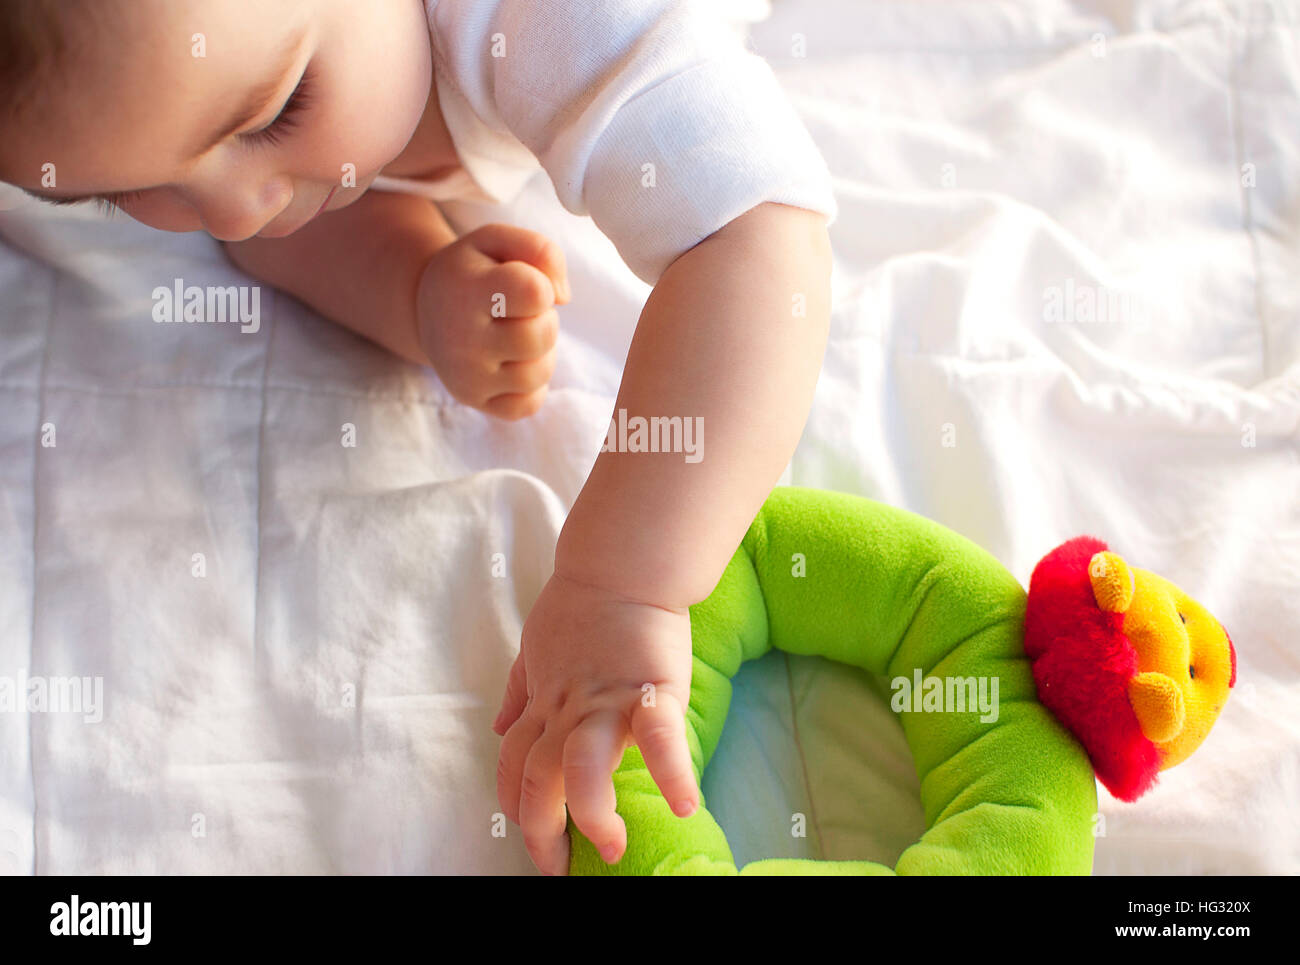 Baby on blanket, view from above Stock Photo